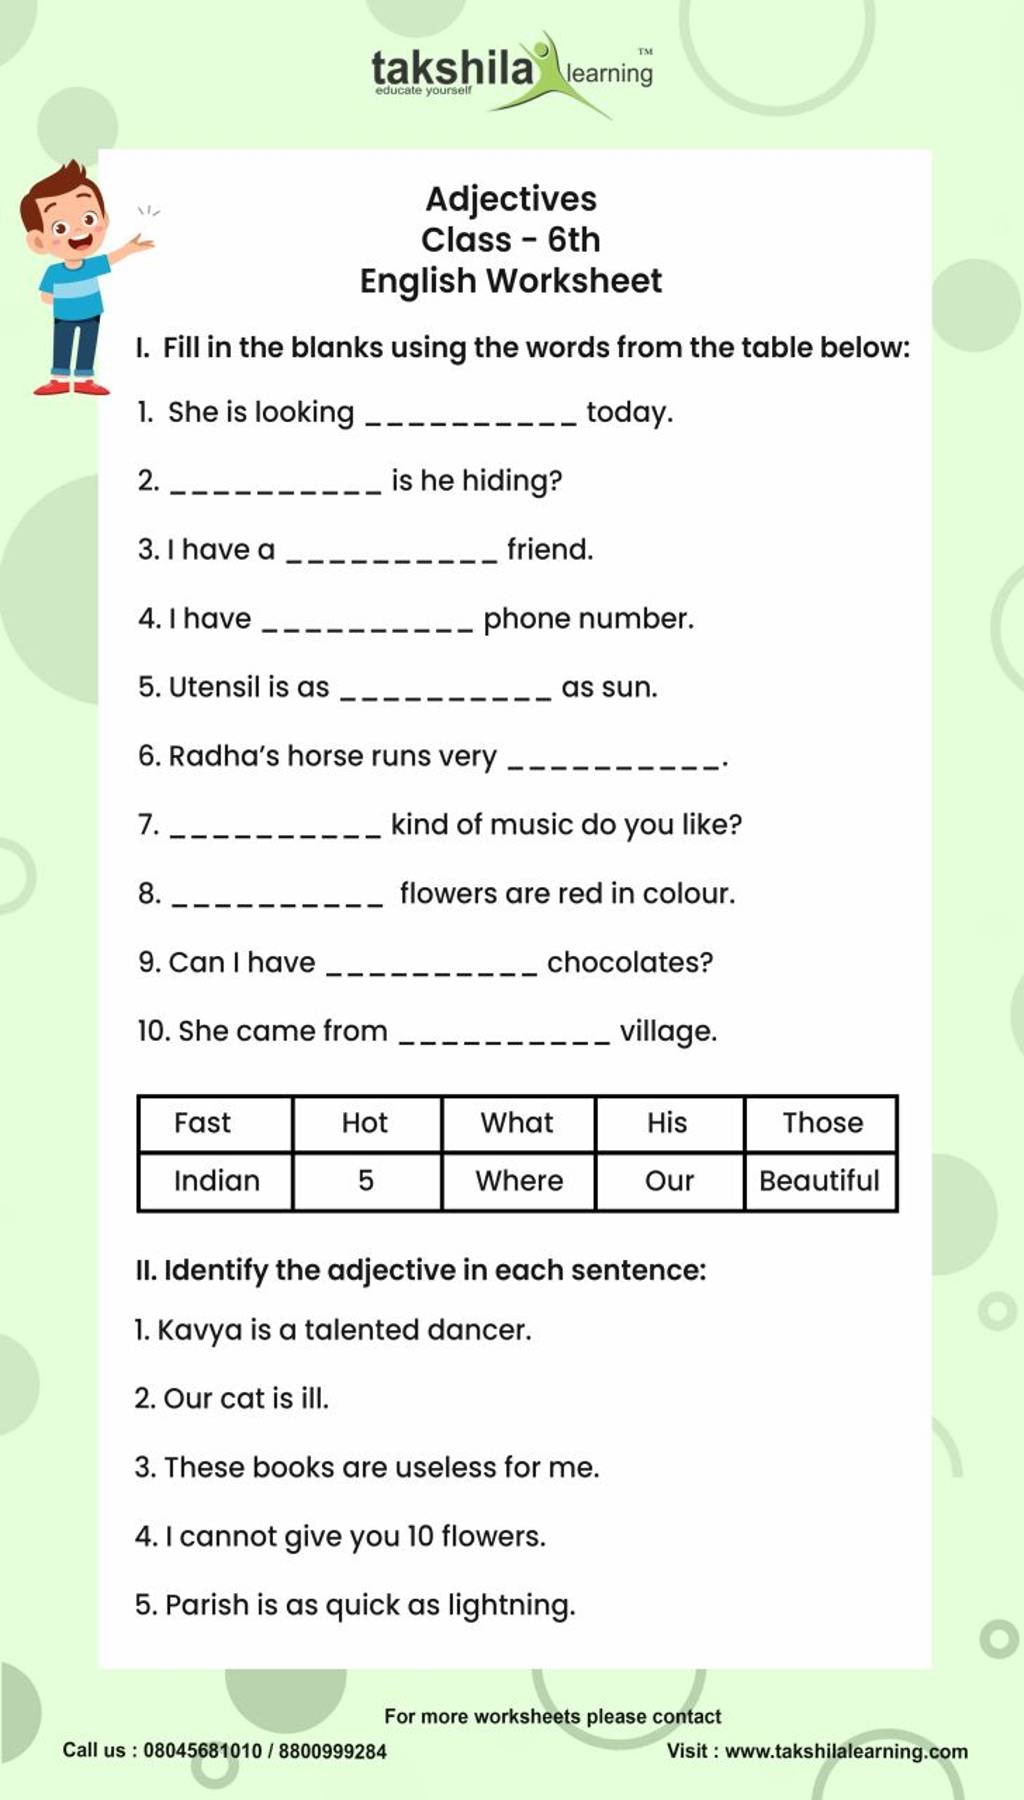 takshila-learning-adjectives-class-6th-english-worksheet-i-fill-in-the